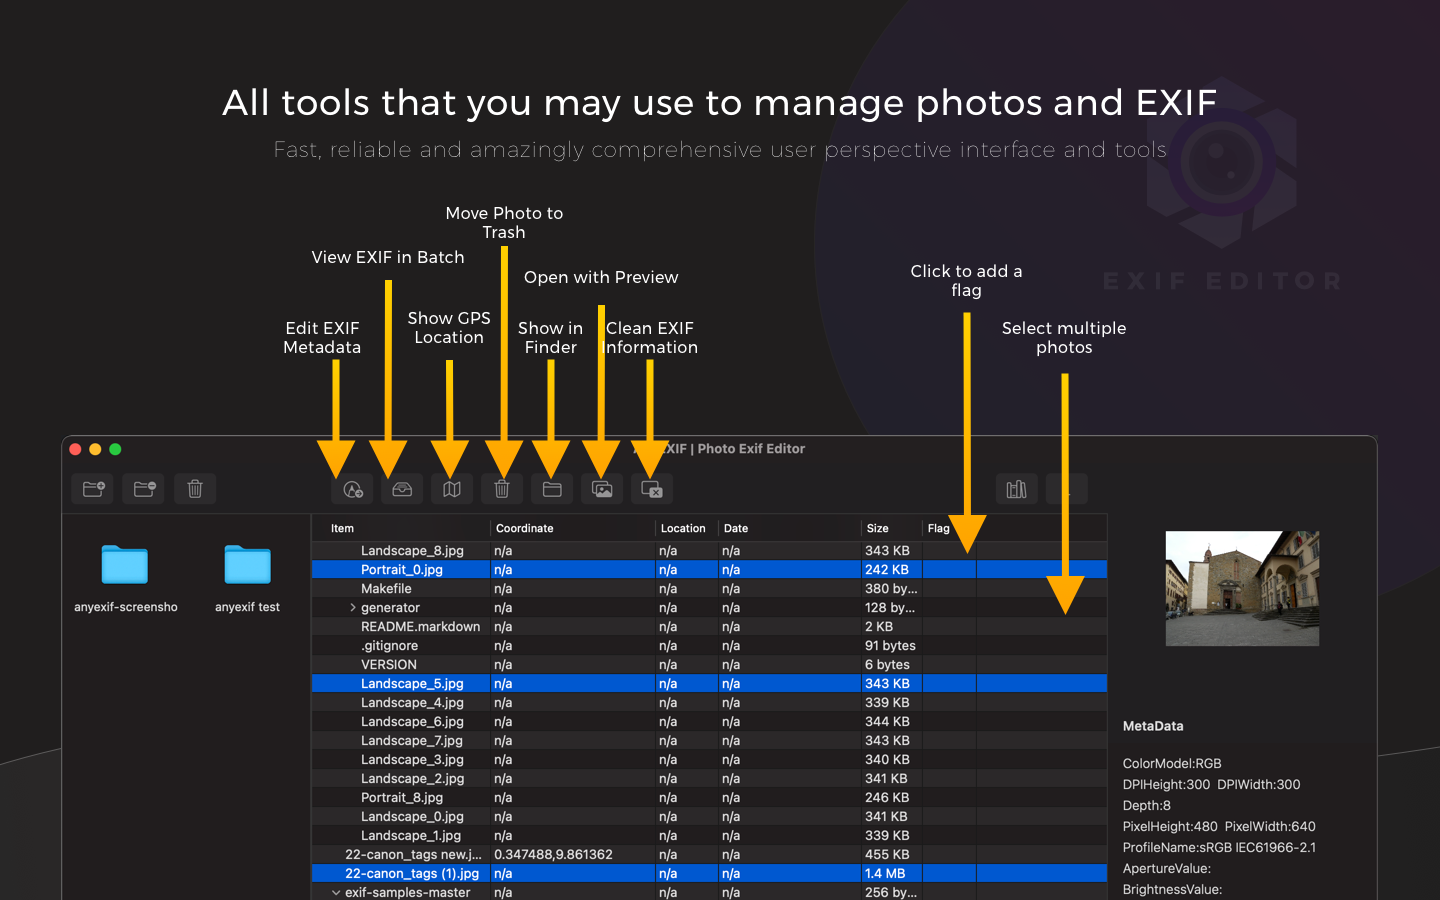 Exif Editor 1.2 : All tools that you may use to manage photos and EXIF. Fast, reliable and amazingly comprehensive user perspective interface and tools.